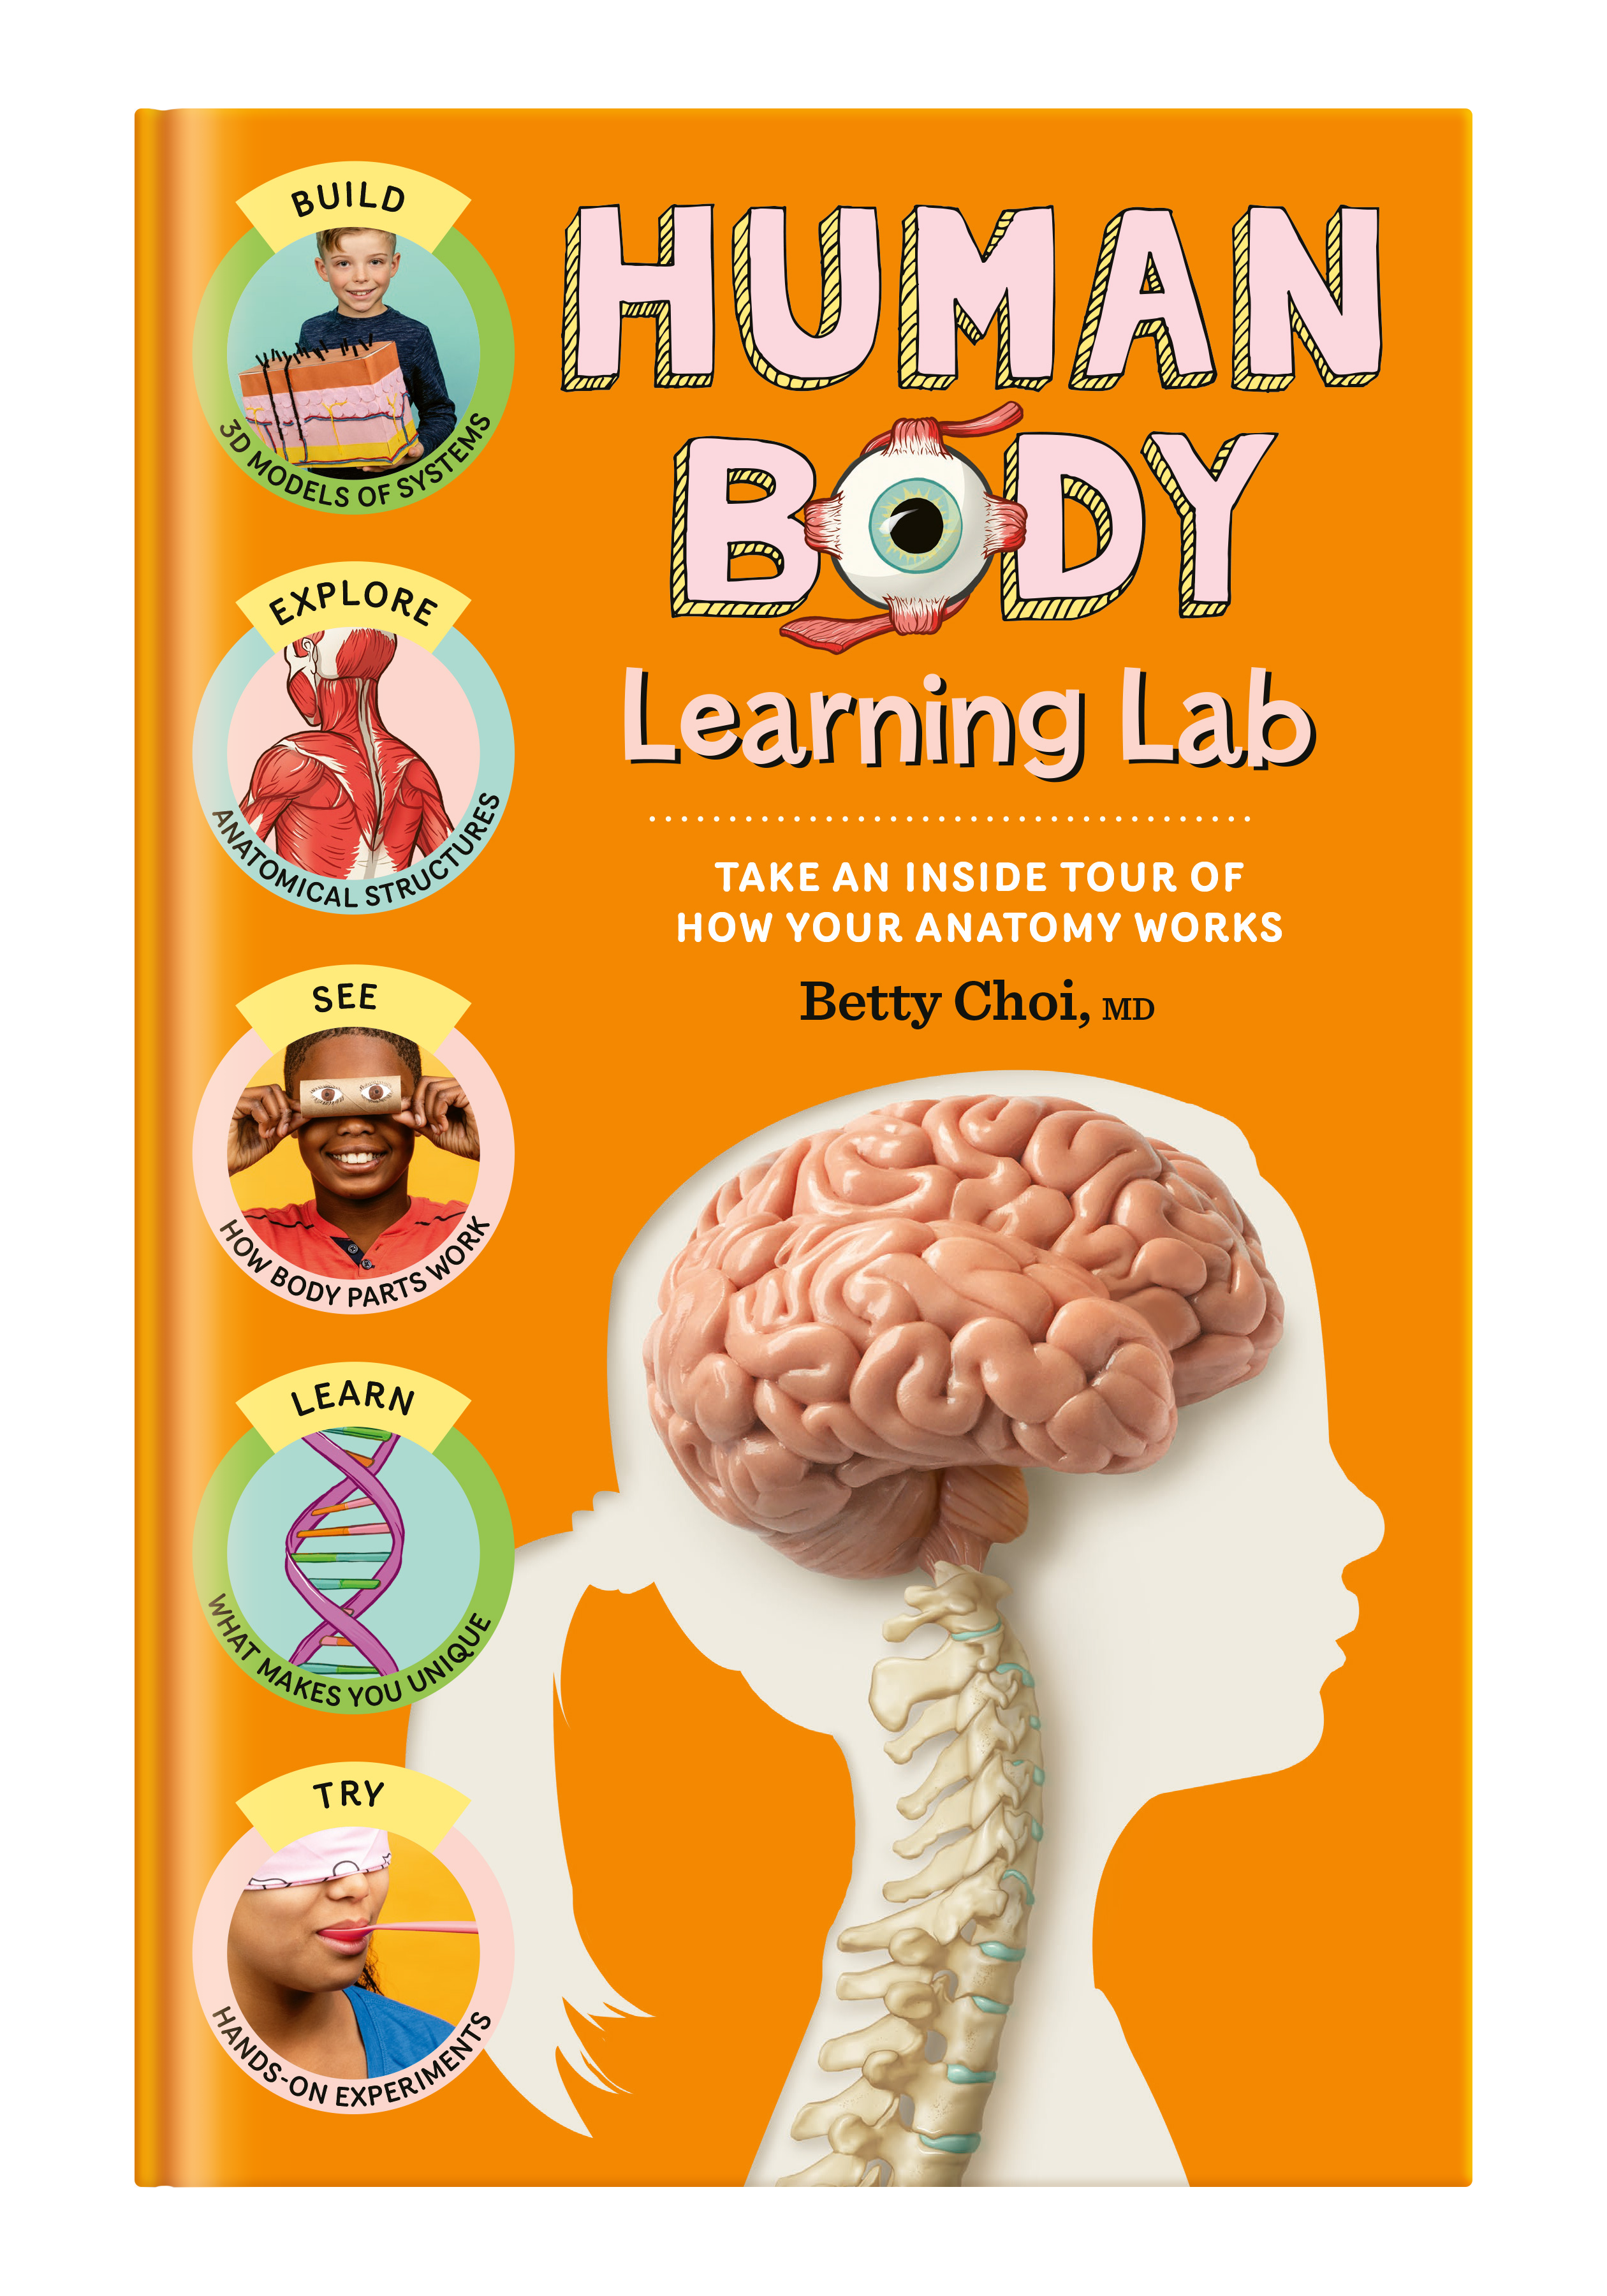 Human Body Learning Lab Book Cover